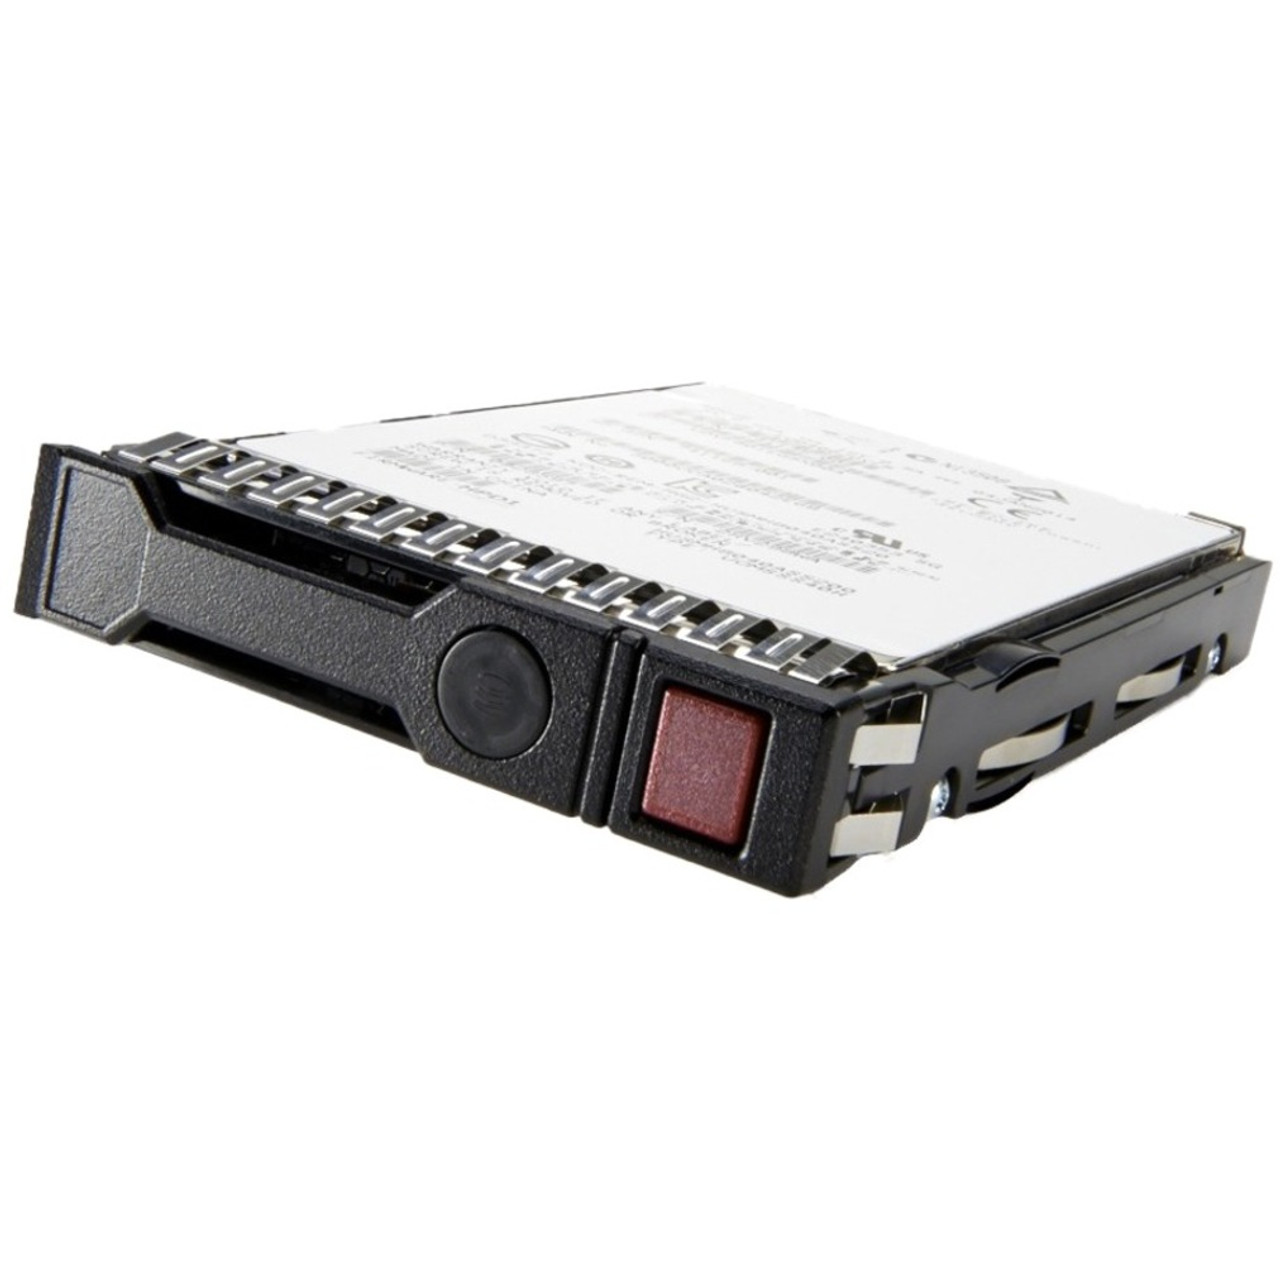 HPE 240 GB Solid State Drive - 2.5" Internal - SATA (SATA/600) - Read Intensive - Server Device Supported - 0.8 DWPD - 560 MB/s Maximum Read Transfer Rate - 3 Year Warranty - P18420-B21